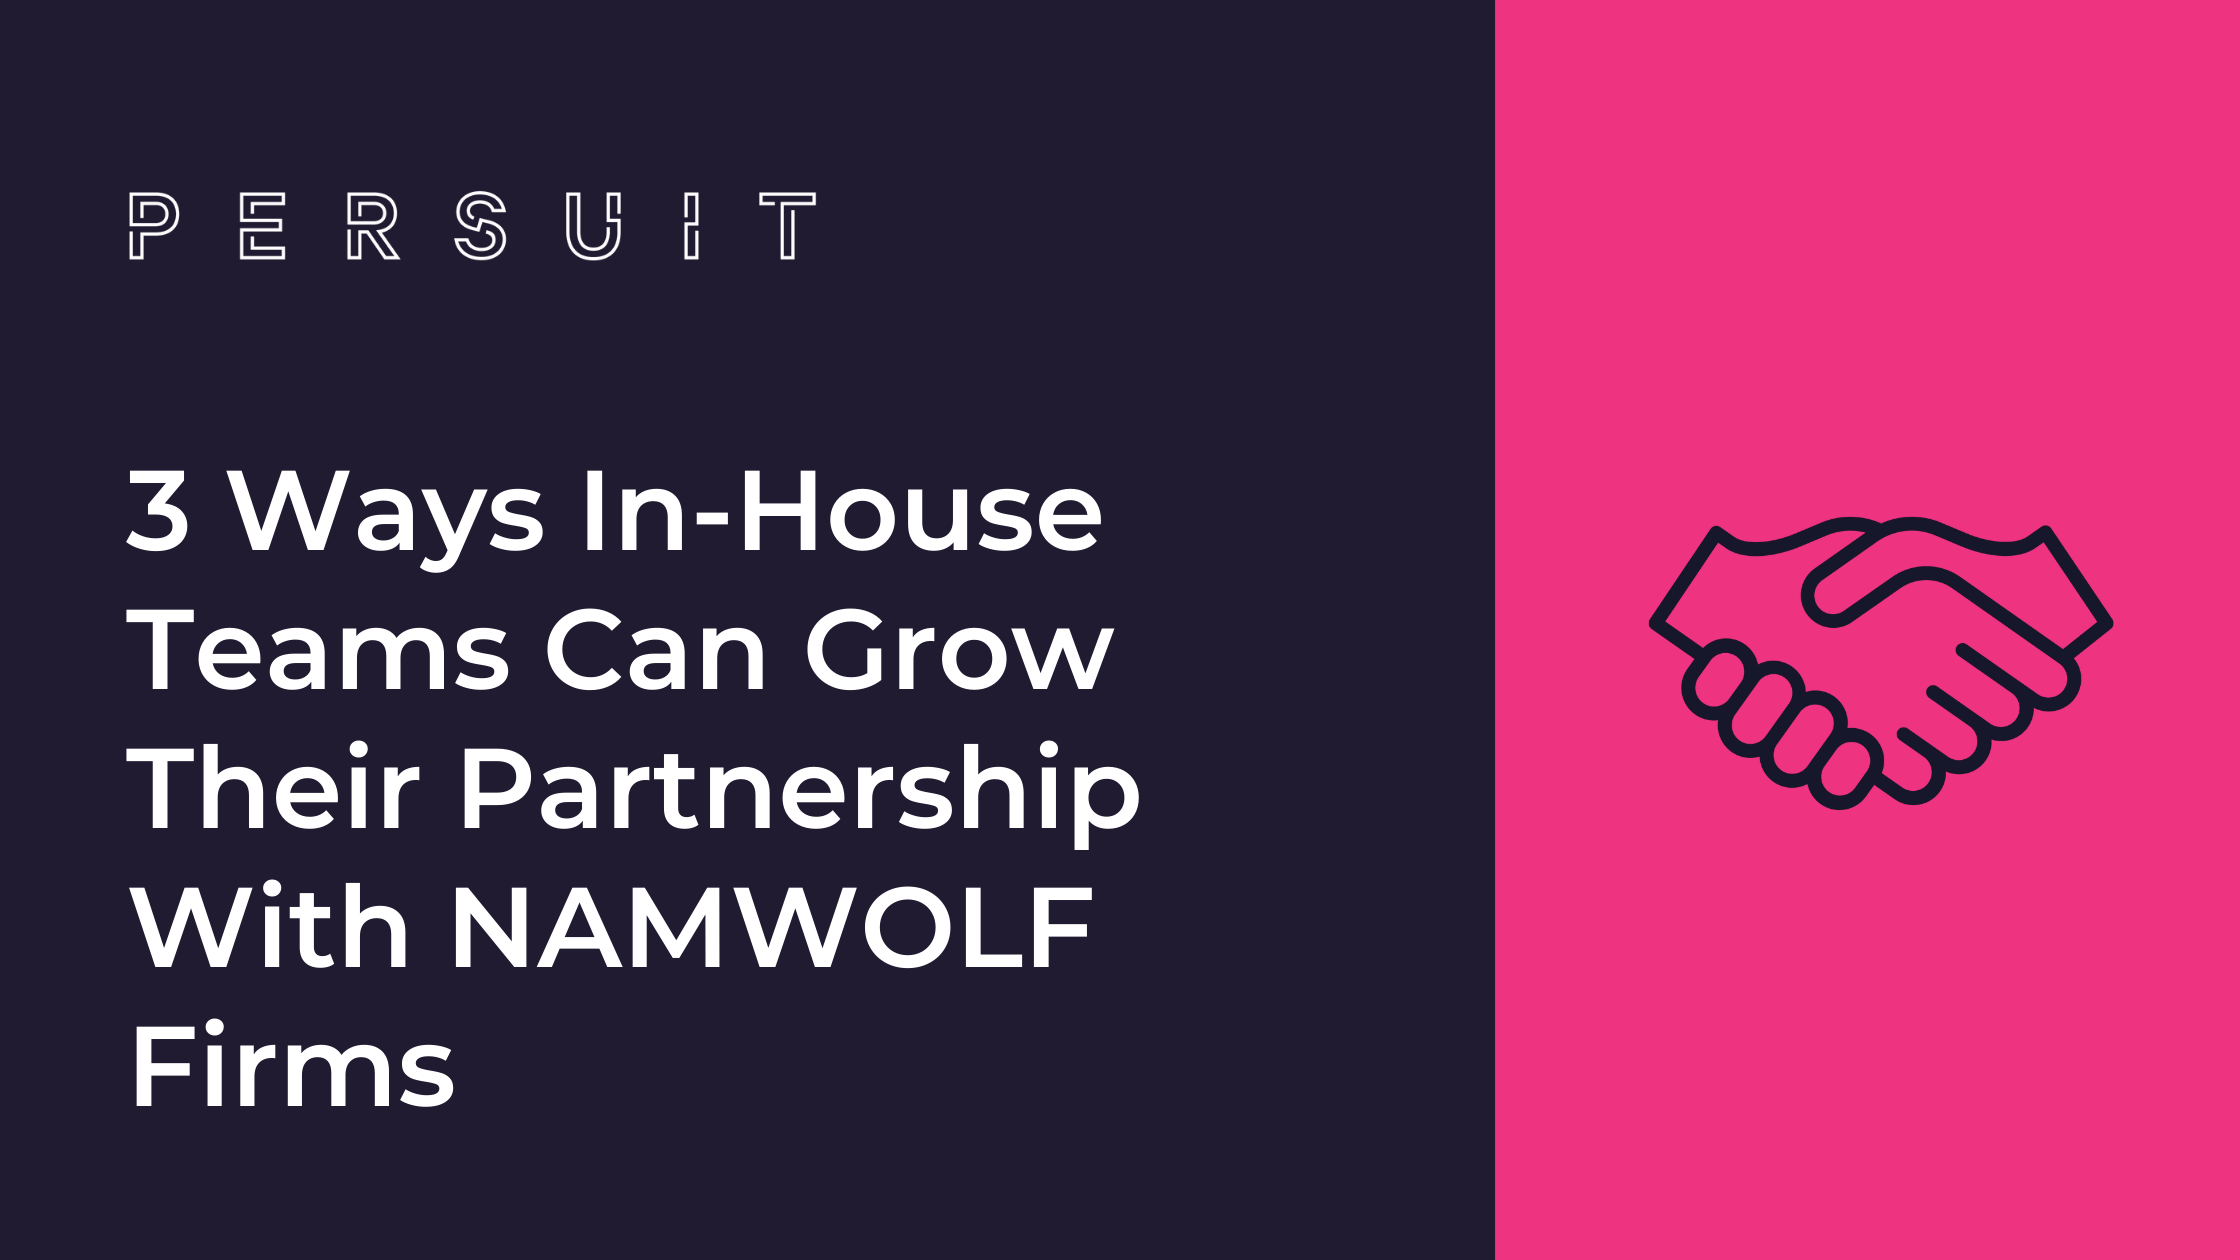 3 Ways In-House Teams Can Grow Their Partnership With NAMWOLF Firms